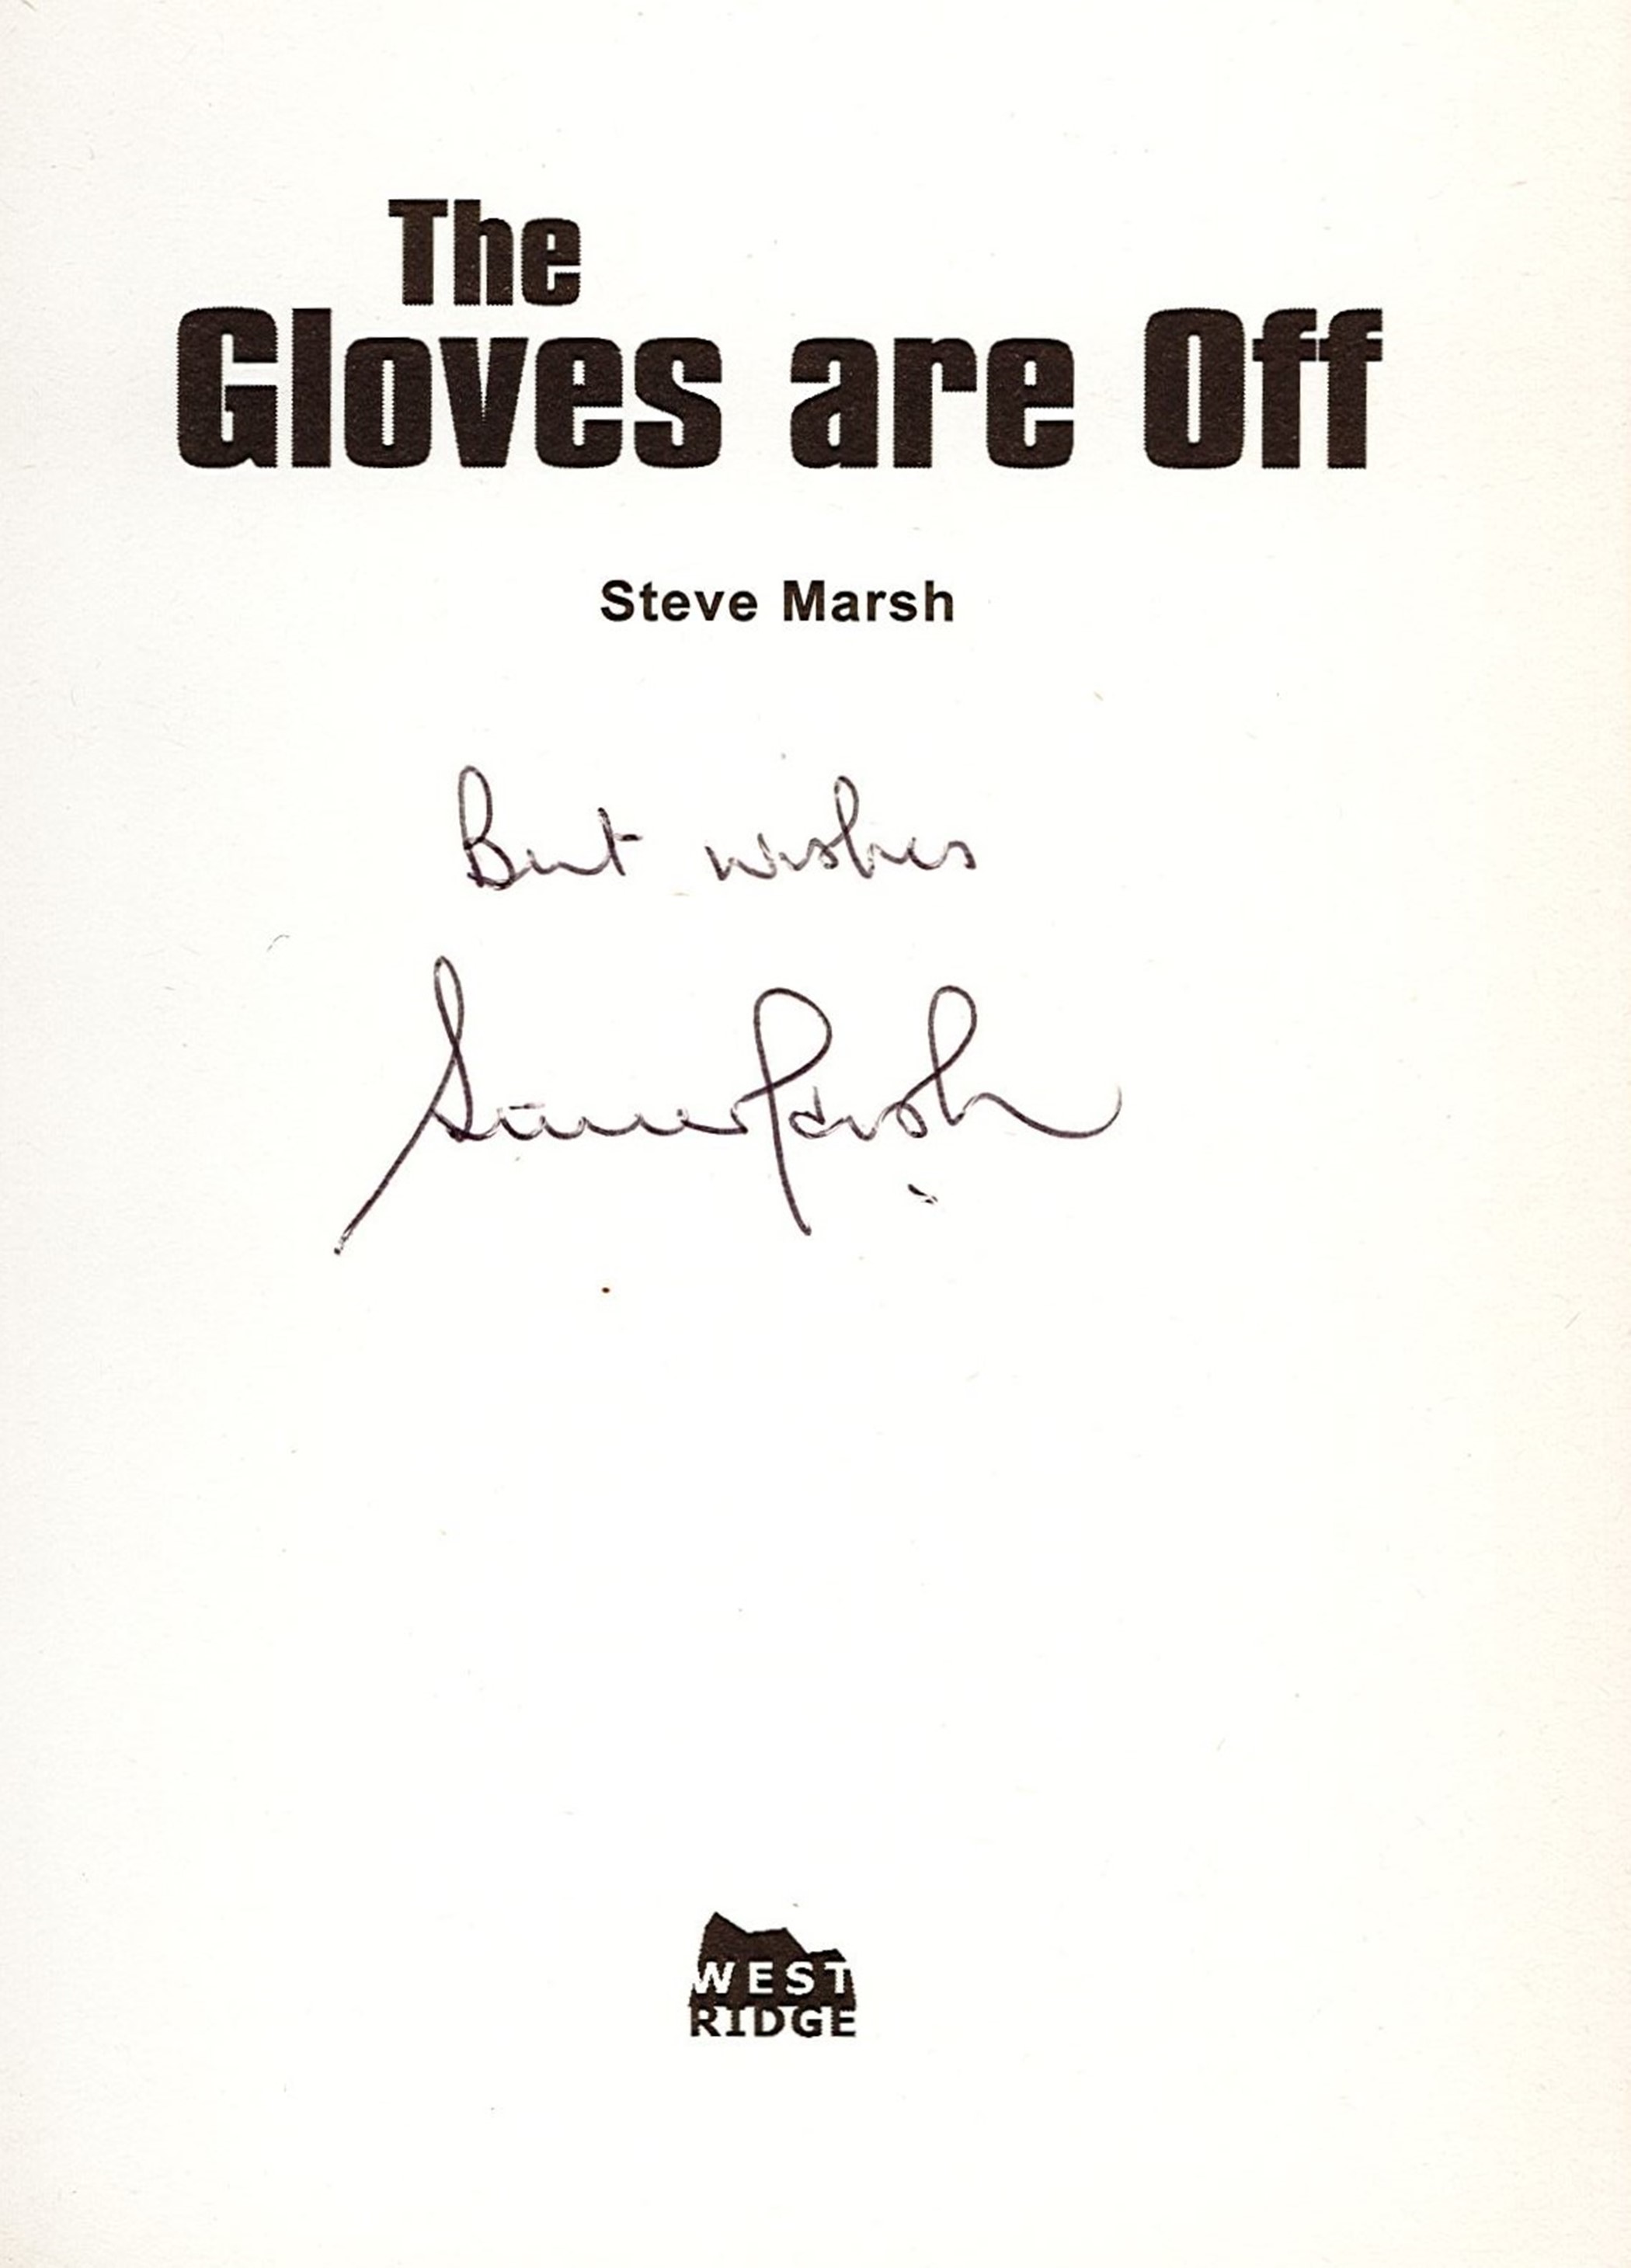 Signed Book Steve Marsh The Gloves are off First Edition 2001 Hardback Book Signed by Steve Marsh on - Image 2 of 4